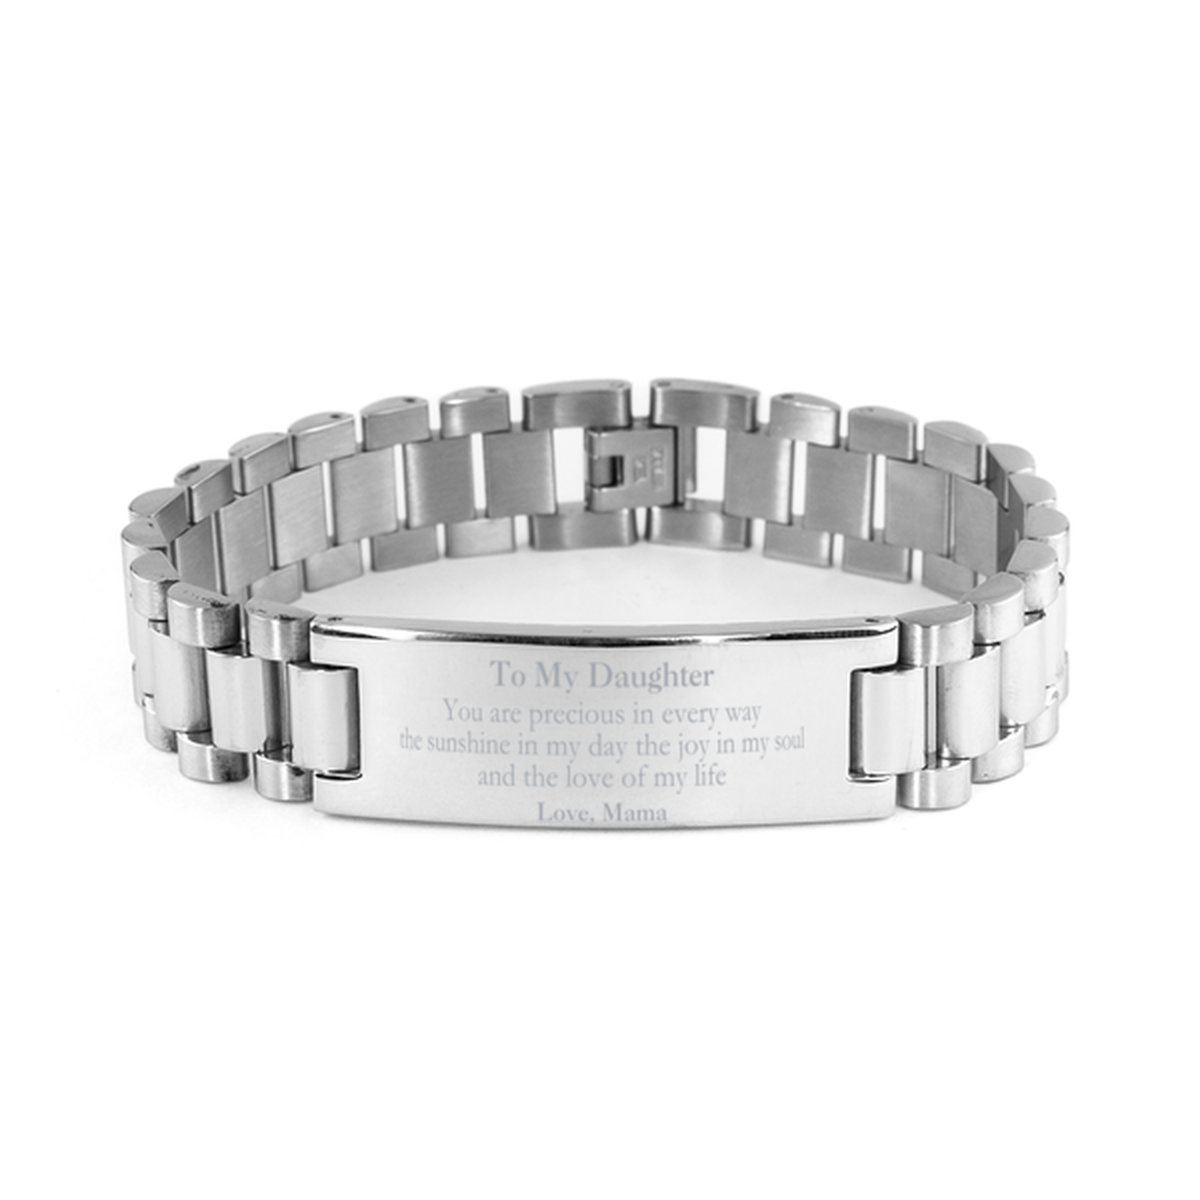 Graduation Gifts for Daughter Ladder Stainless Steel Bracelet Present from Mama, Christmas Daughter Birthday Gifts Daughter You are precious in every way the sunshine in my day. Love, Mama